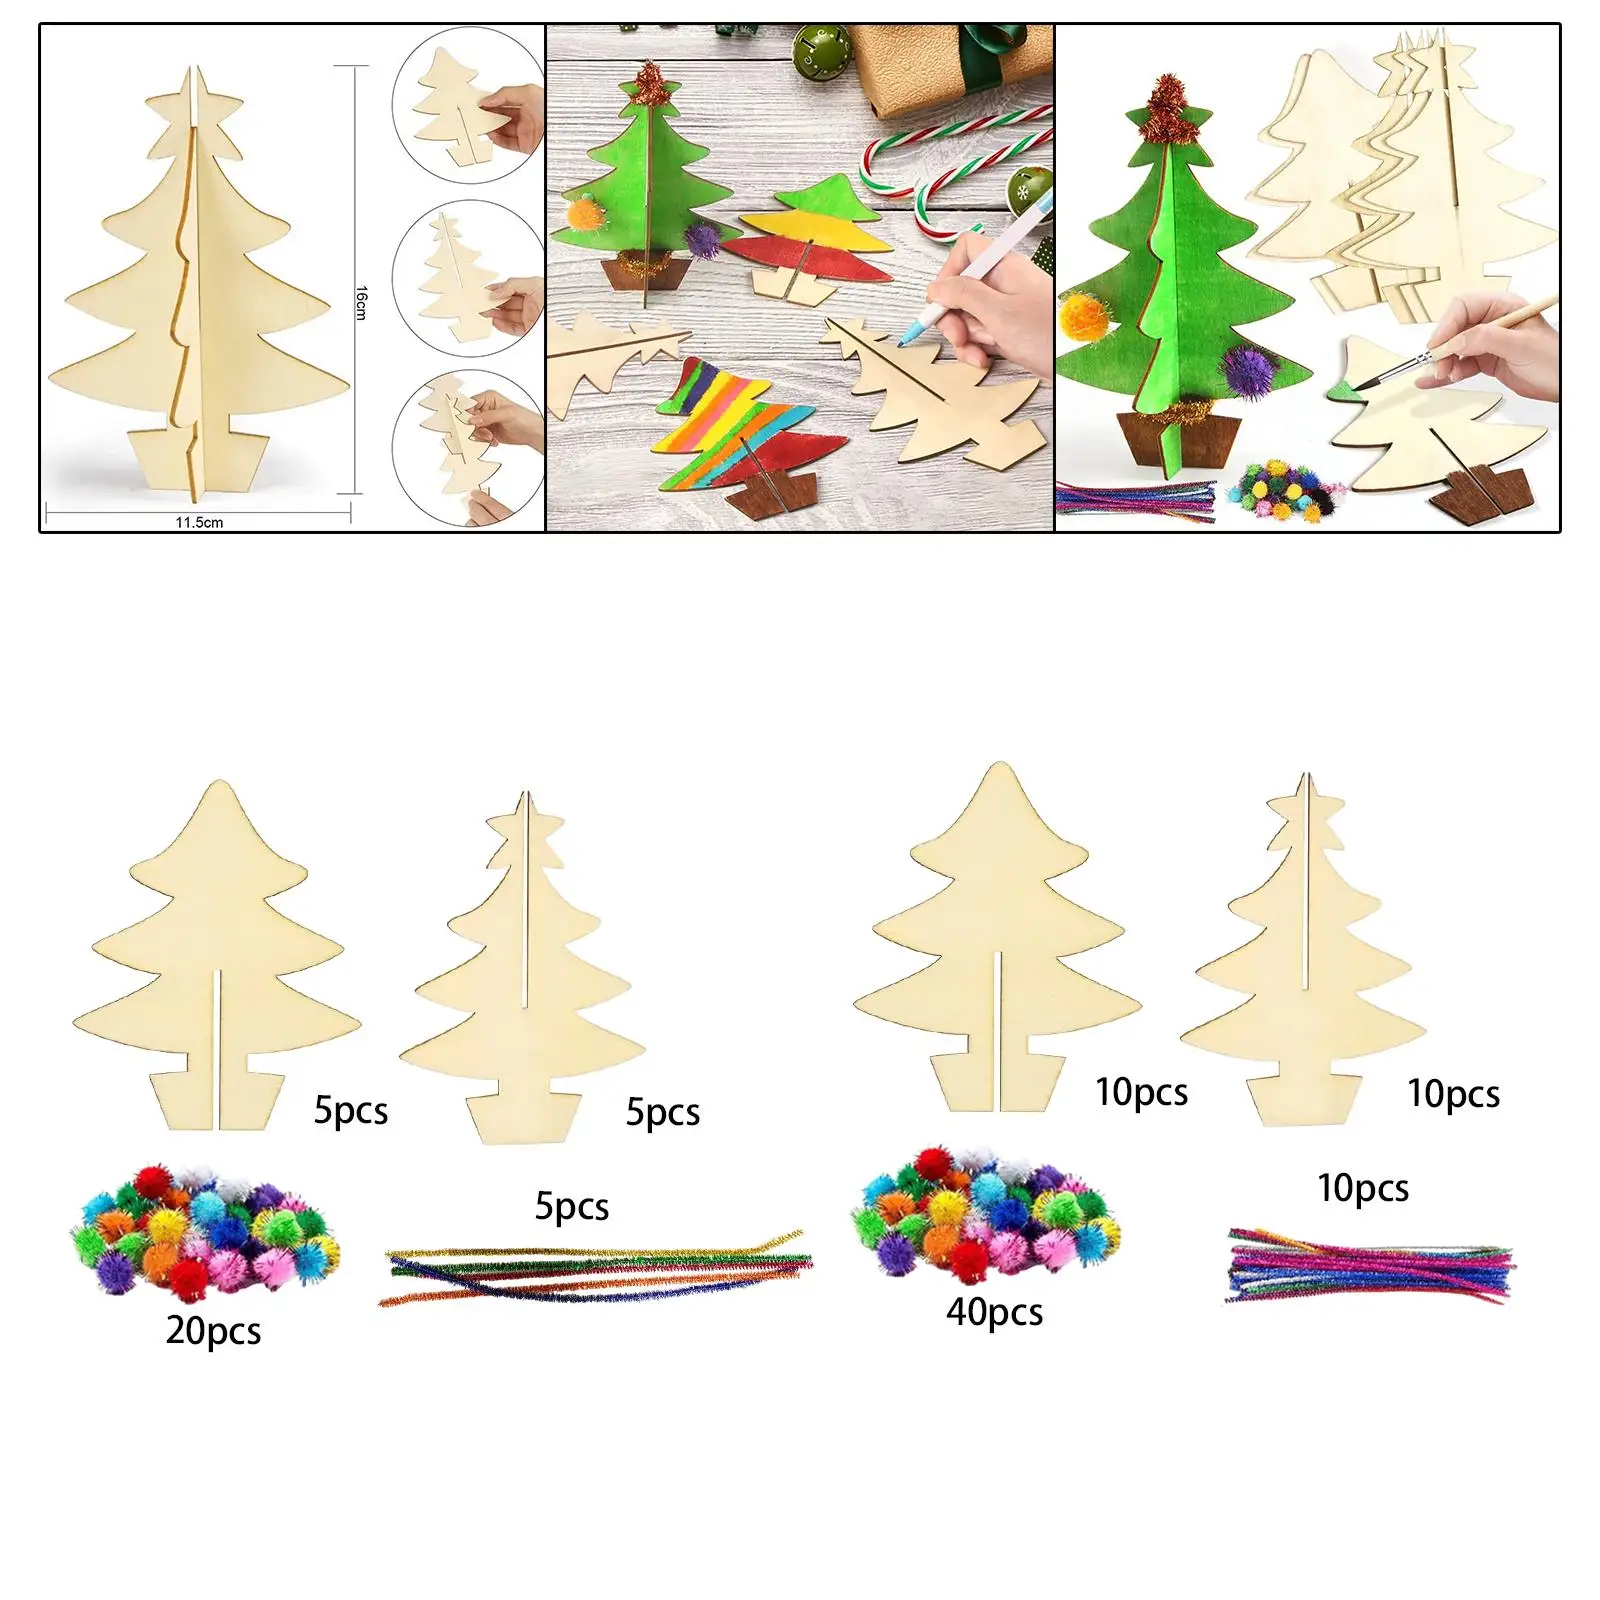 Christmas Tree Wood Slices Painting Set DIY Crafts for Holiday Decoration Family Activities Party Favor Supplies Boys Girls Kids